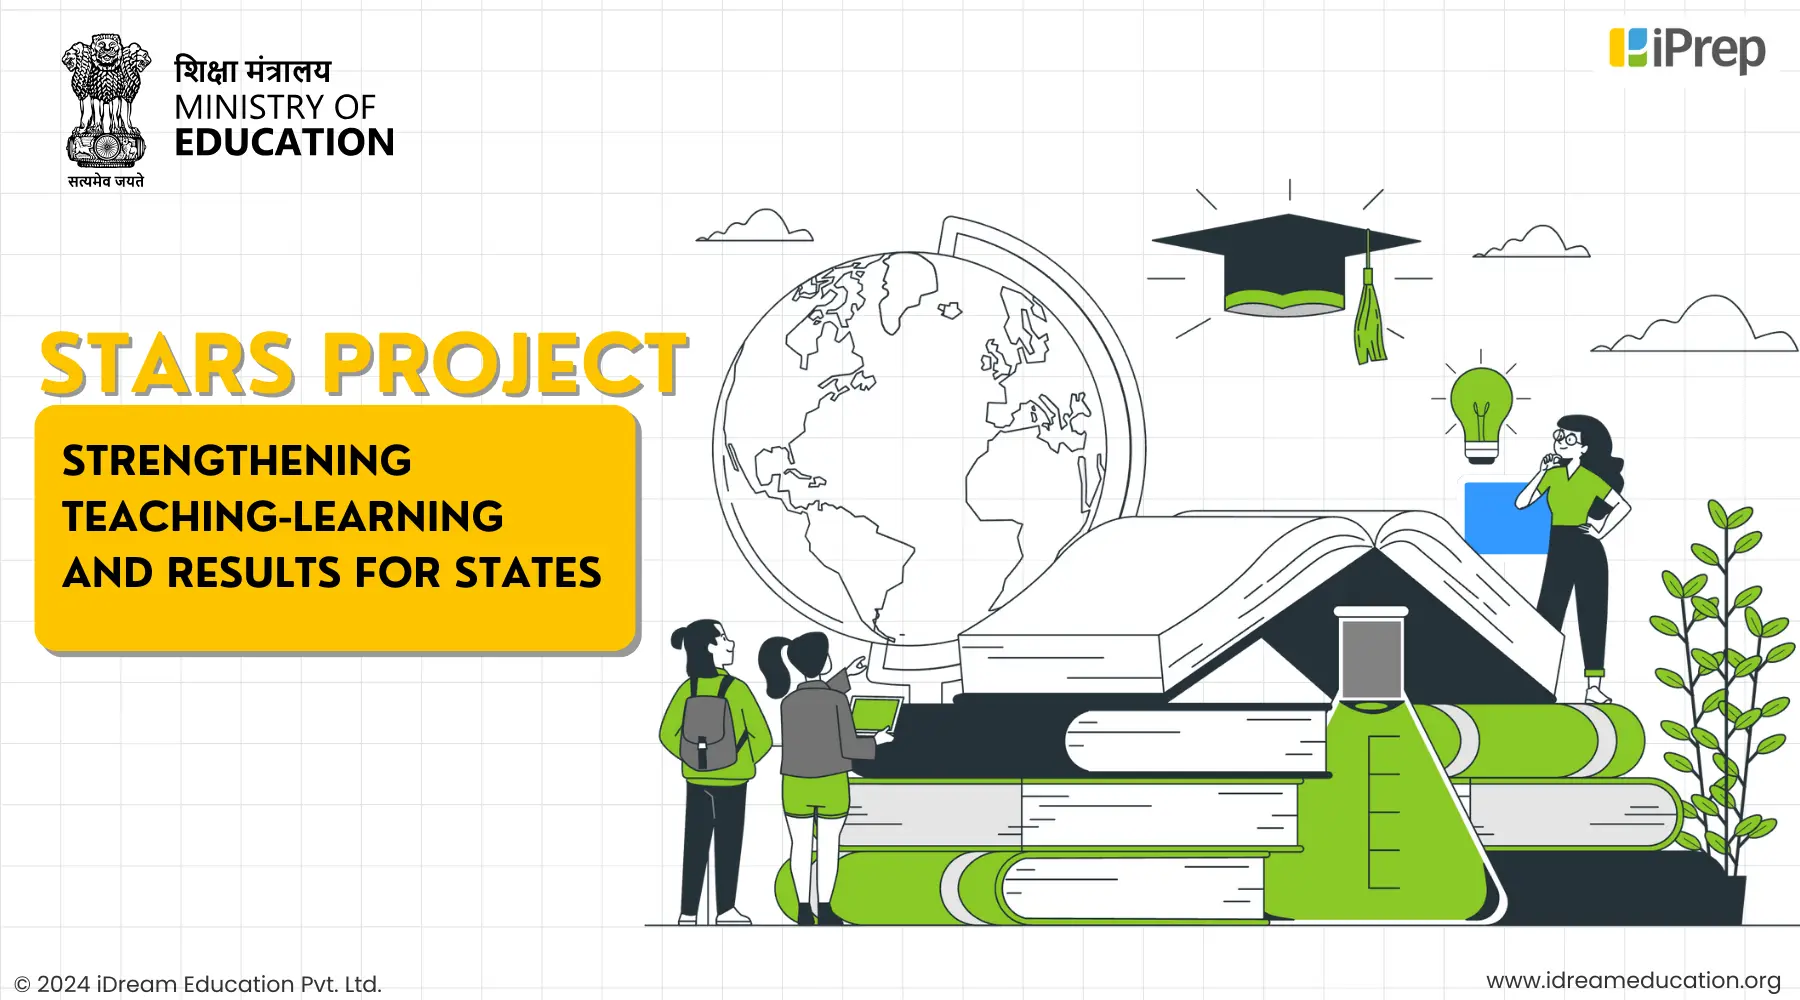 A visual representing the STARS project, an acronym of Strengthening Teaching-Learning and Results for States